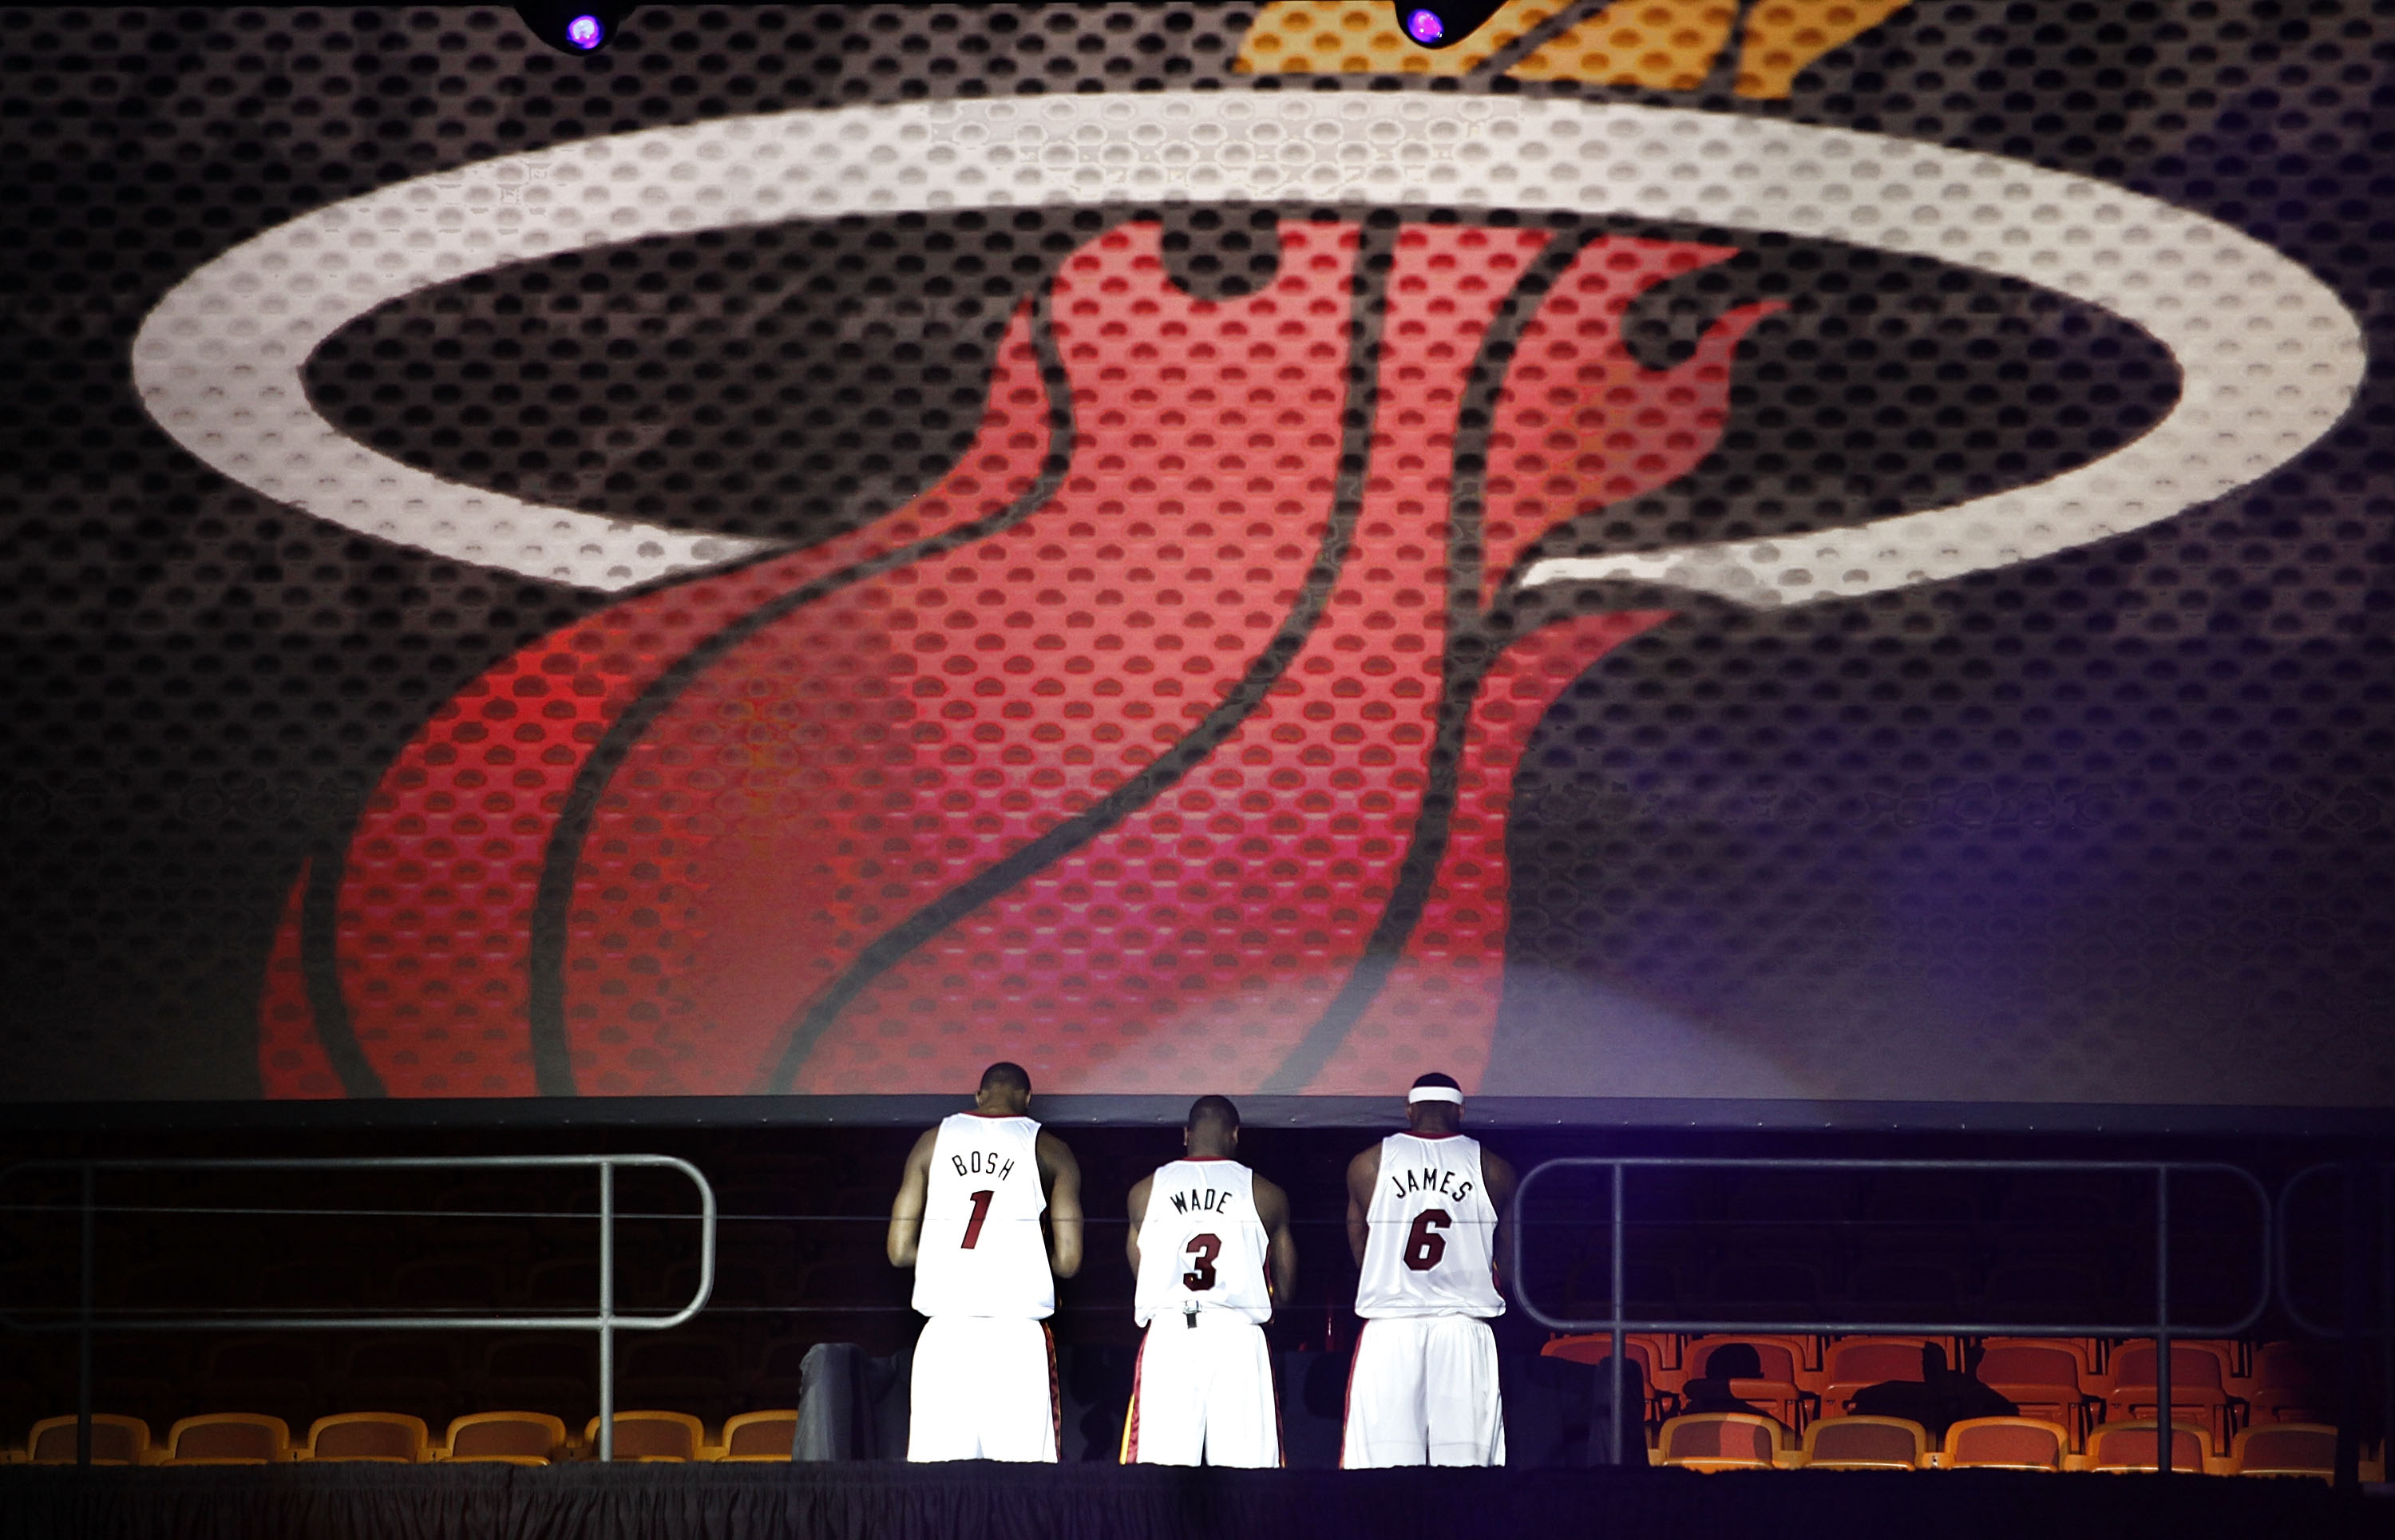 MIAMI - JULY 09:  (L-R) Chris Bosh #1, Dwyane Wade #3, and LeBron James #6 of the Miami Heat are introduced during a welcome party at American Airlines Arena on July 9, 2010 in Miami, Florida.  (Photo by Marc Serota/Getty Images)